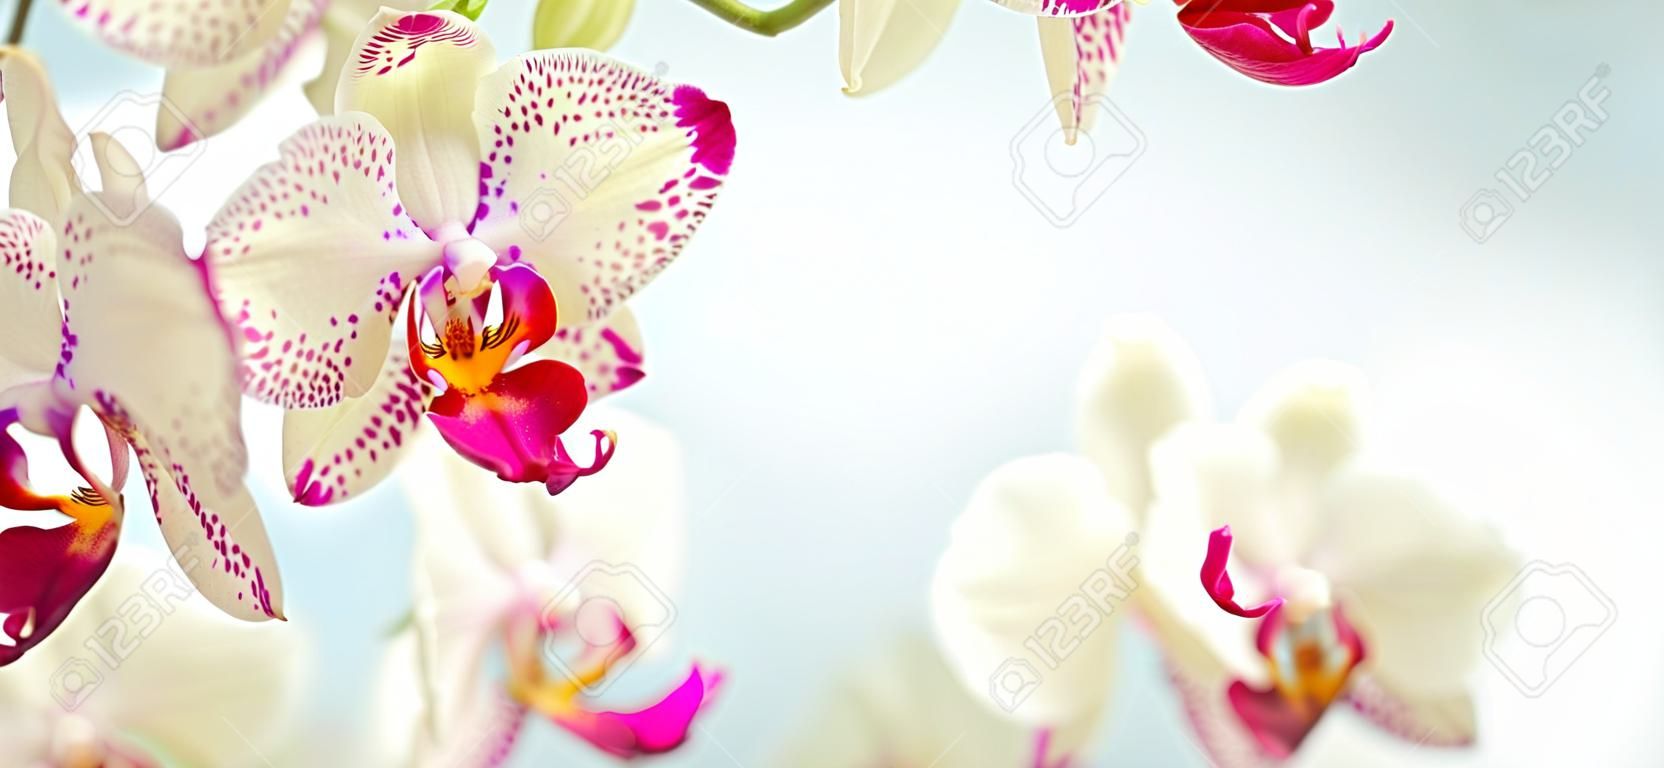 pink orchid flowers close up on defocused blue background banner